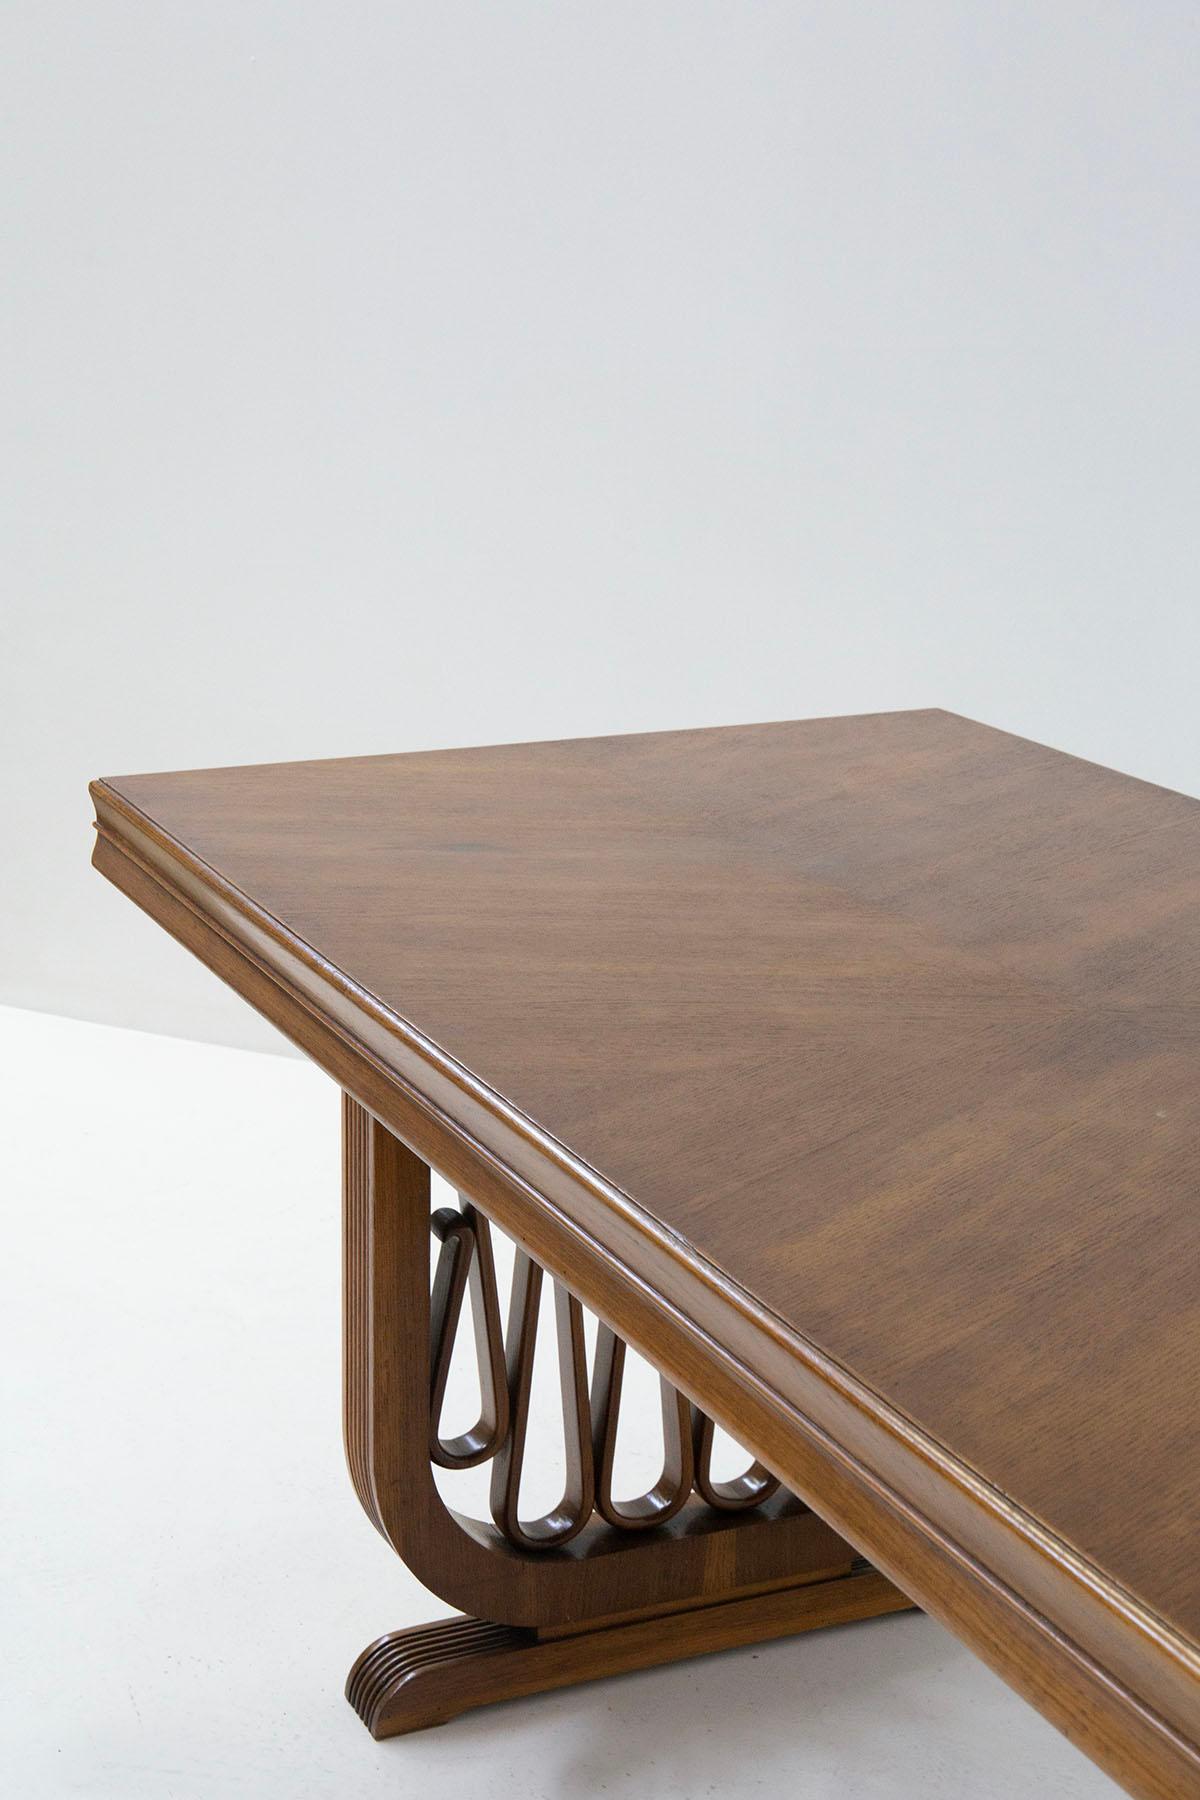 Italian Gio Ponti Attributed Important Wooden Volute Dining Table